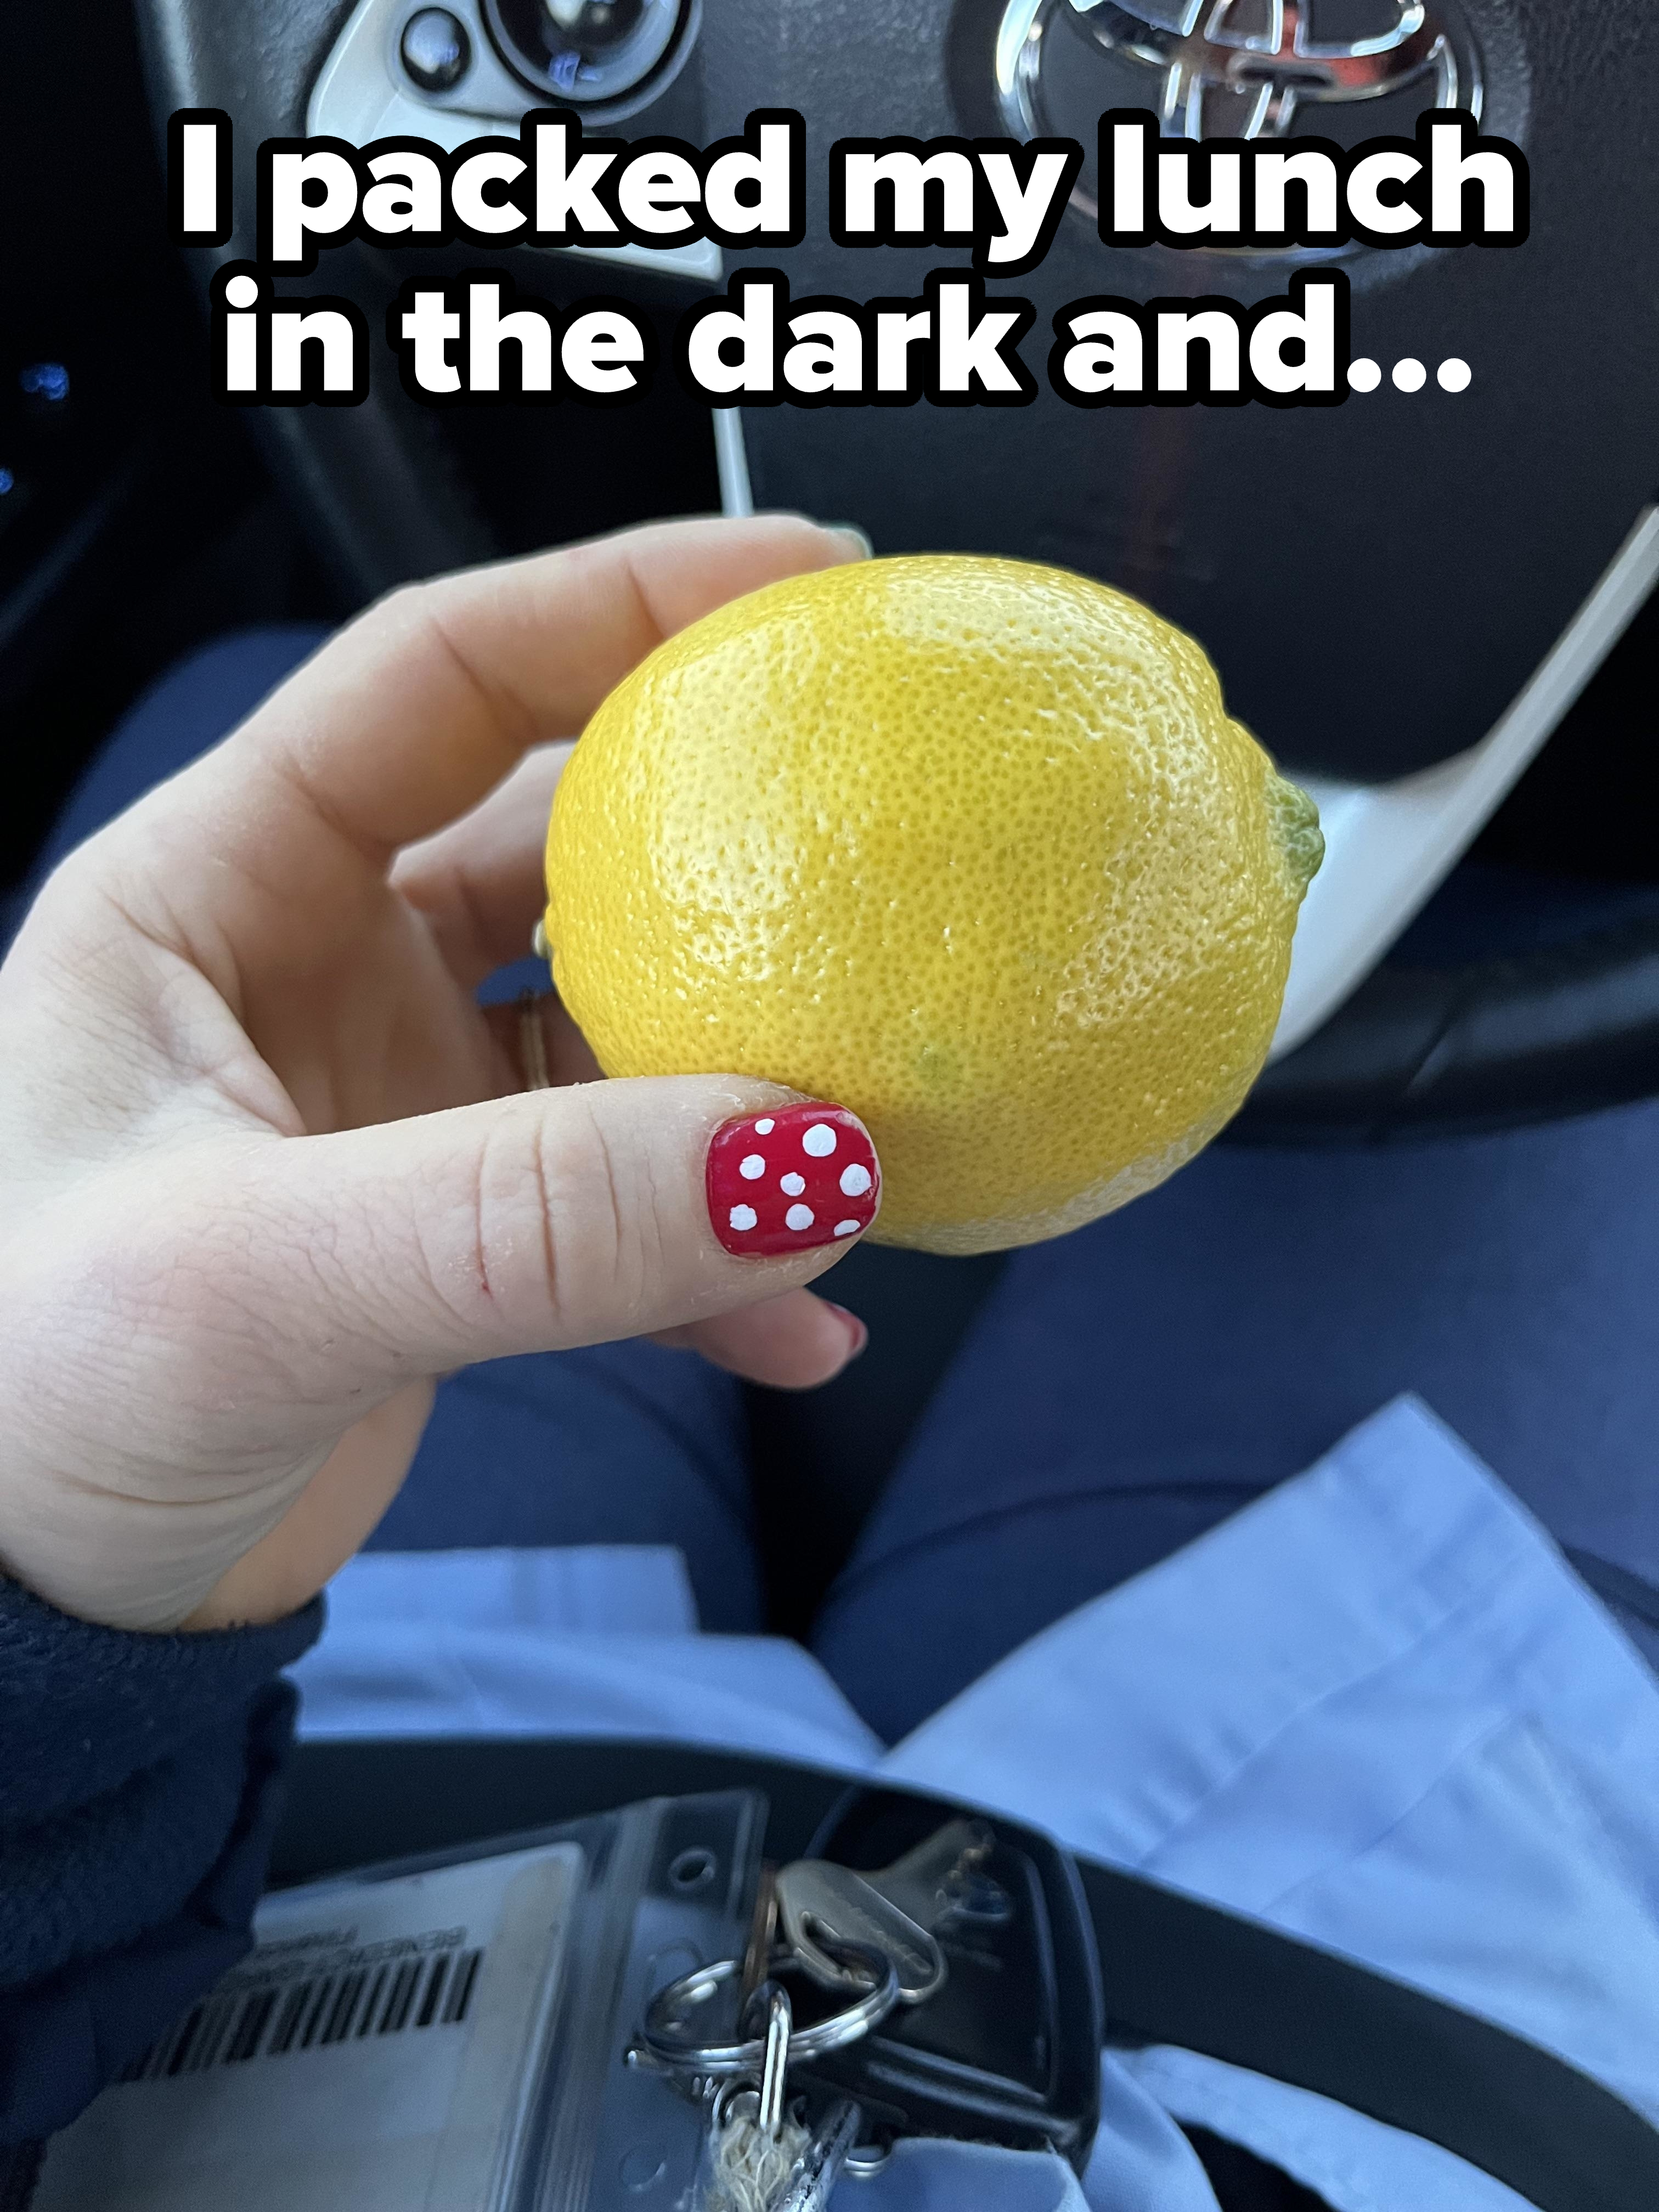 A person holding a lemon with caption &quot;I packed my lunch in the dark&quot;